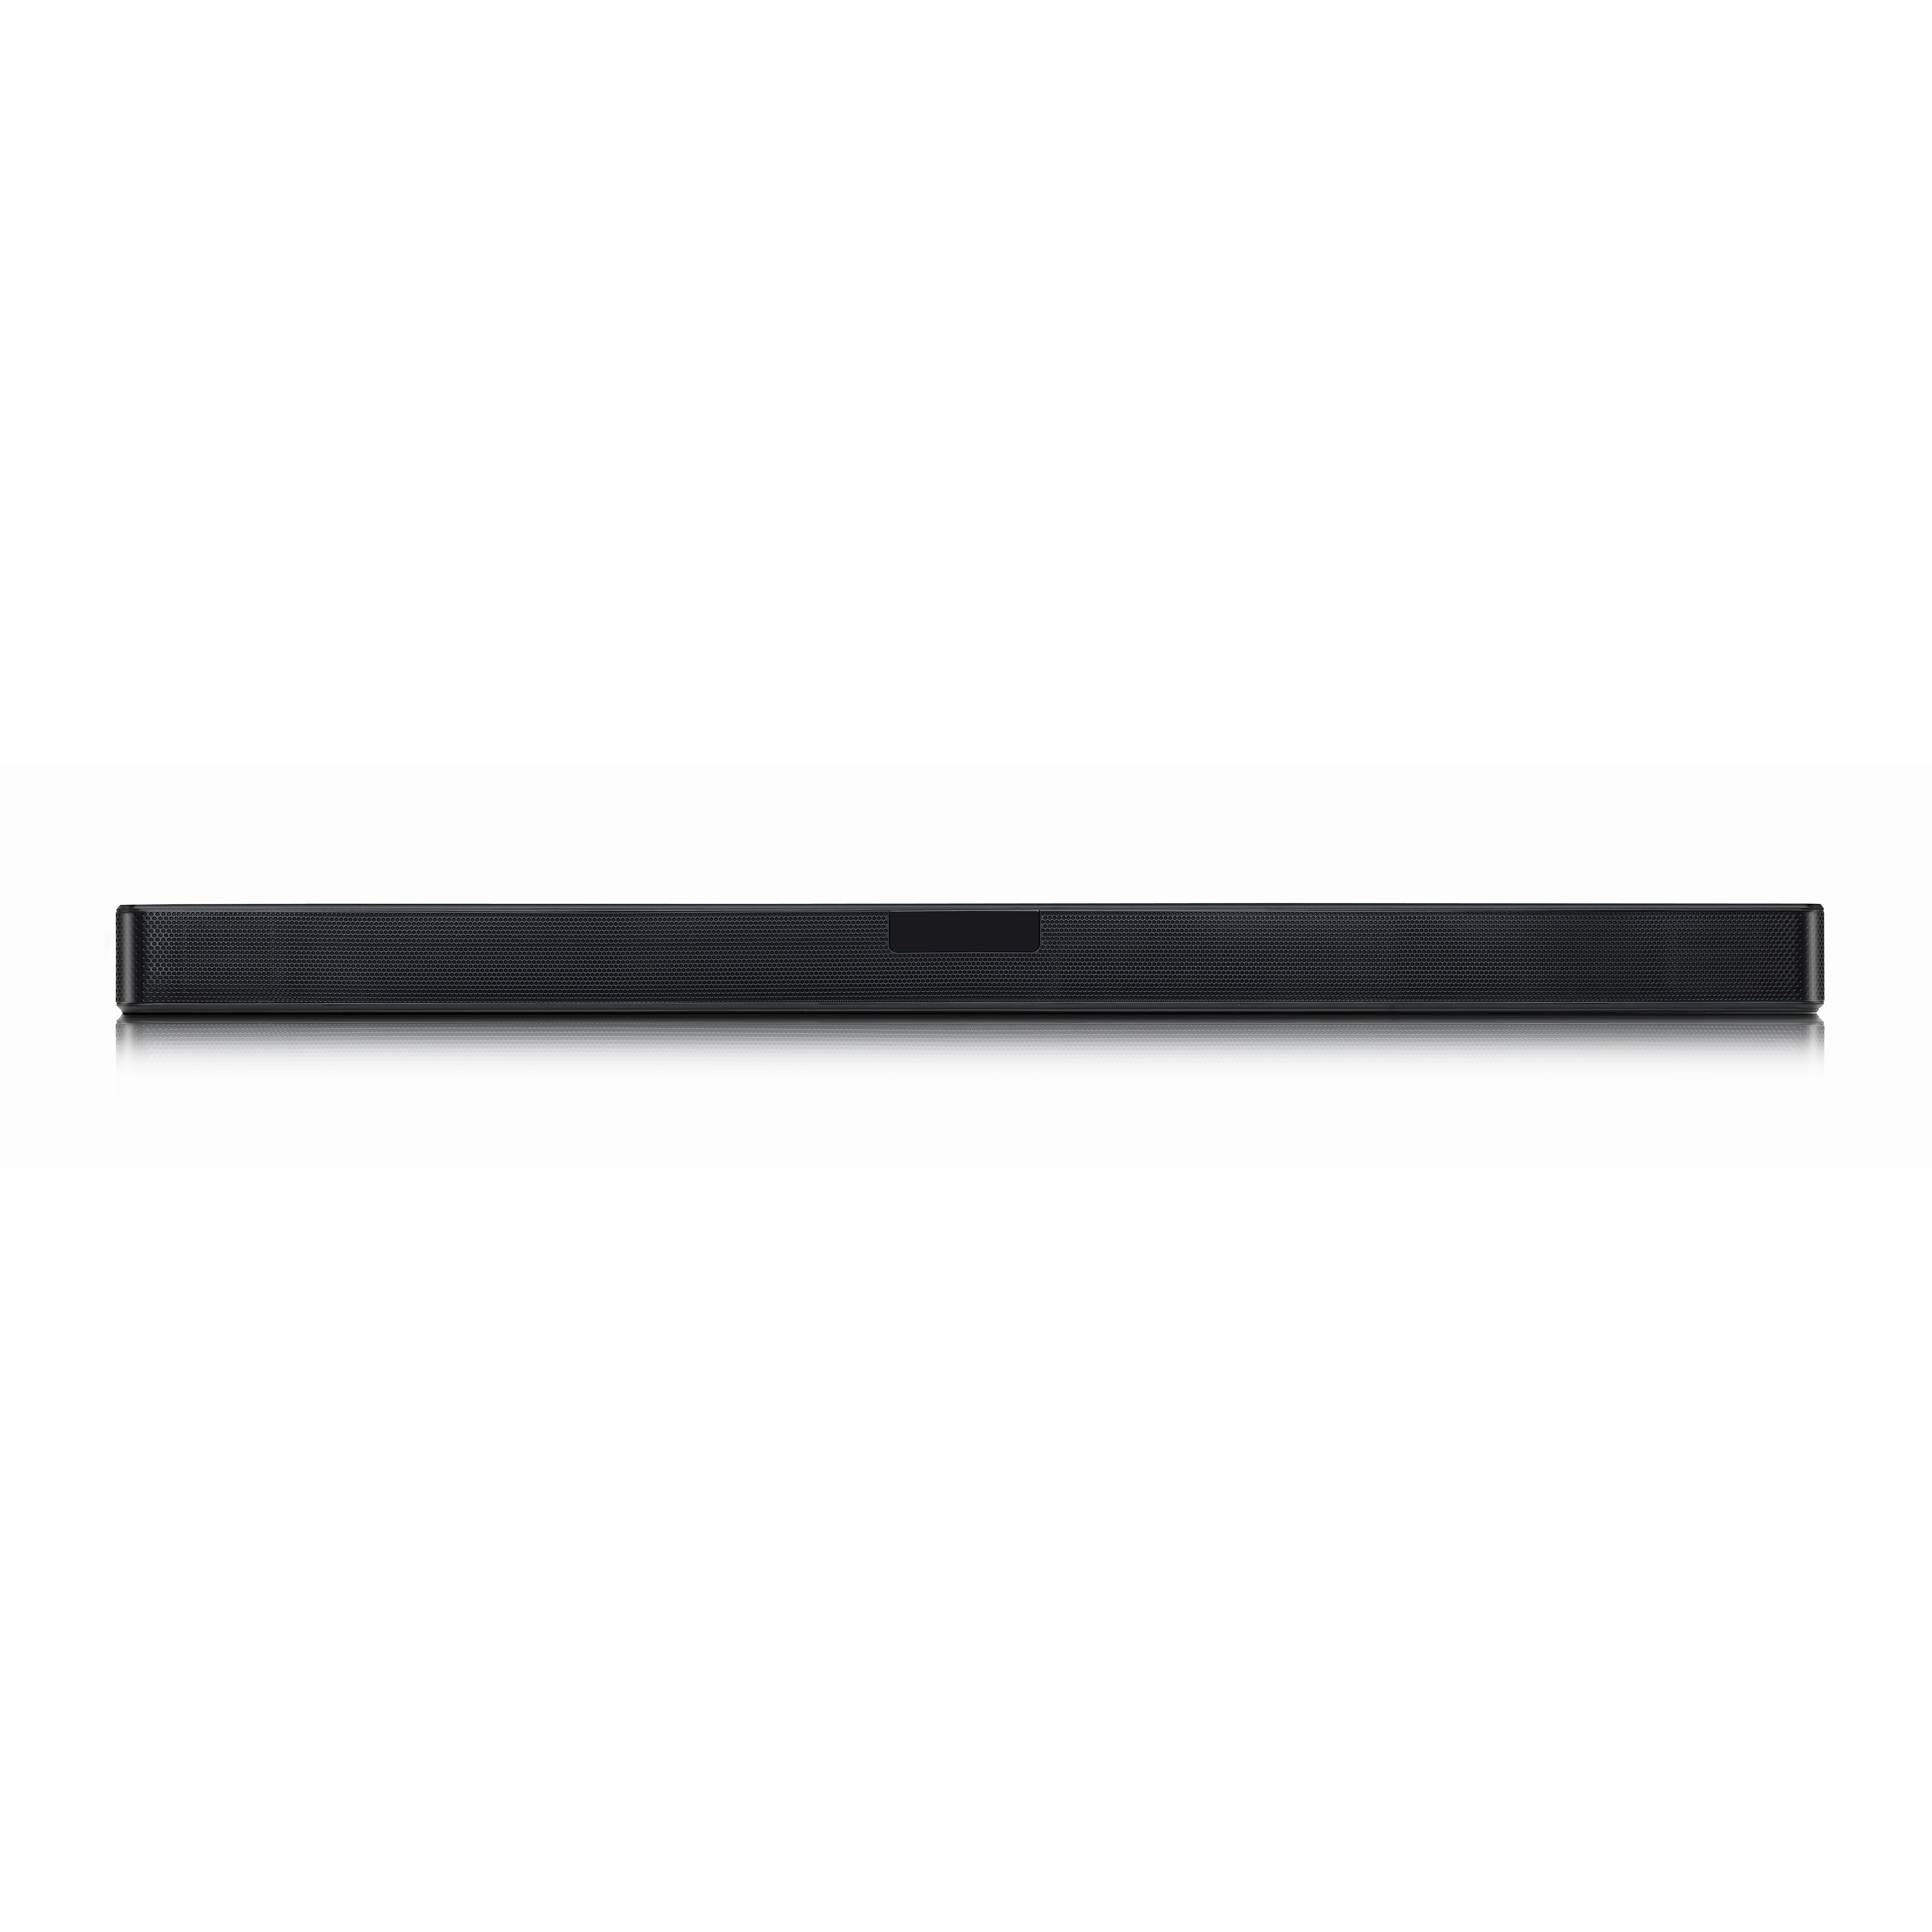 LG 3.1.2 Channel 440W High Res Audio Soundbar with Dolby Atmos® and Google Assistant Built-In - SL8YG - image 5 of 11